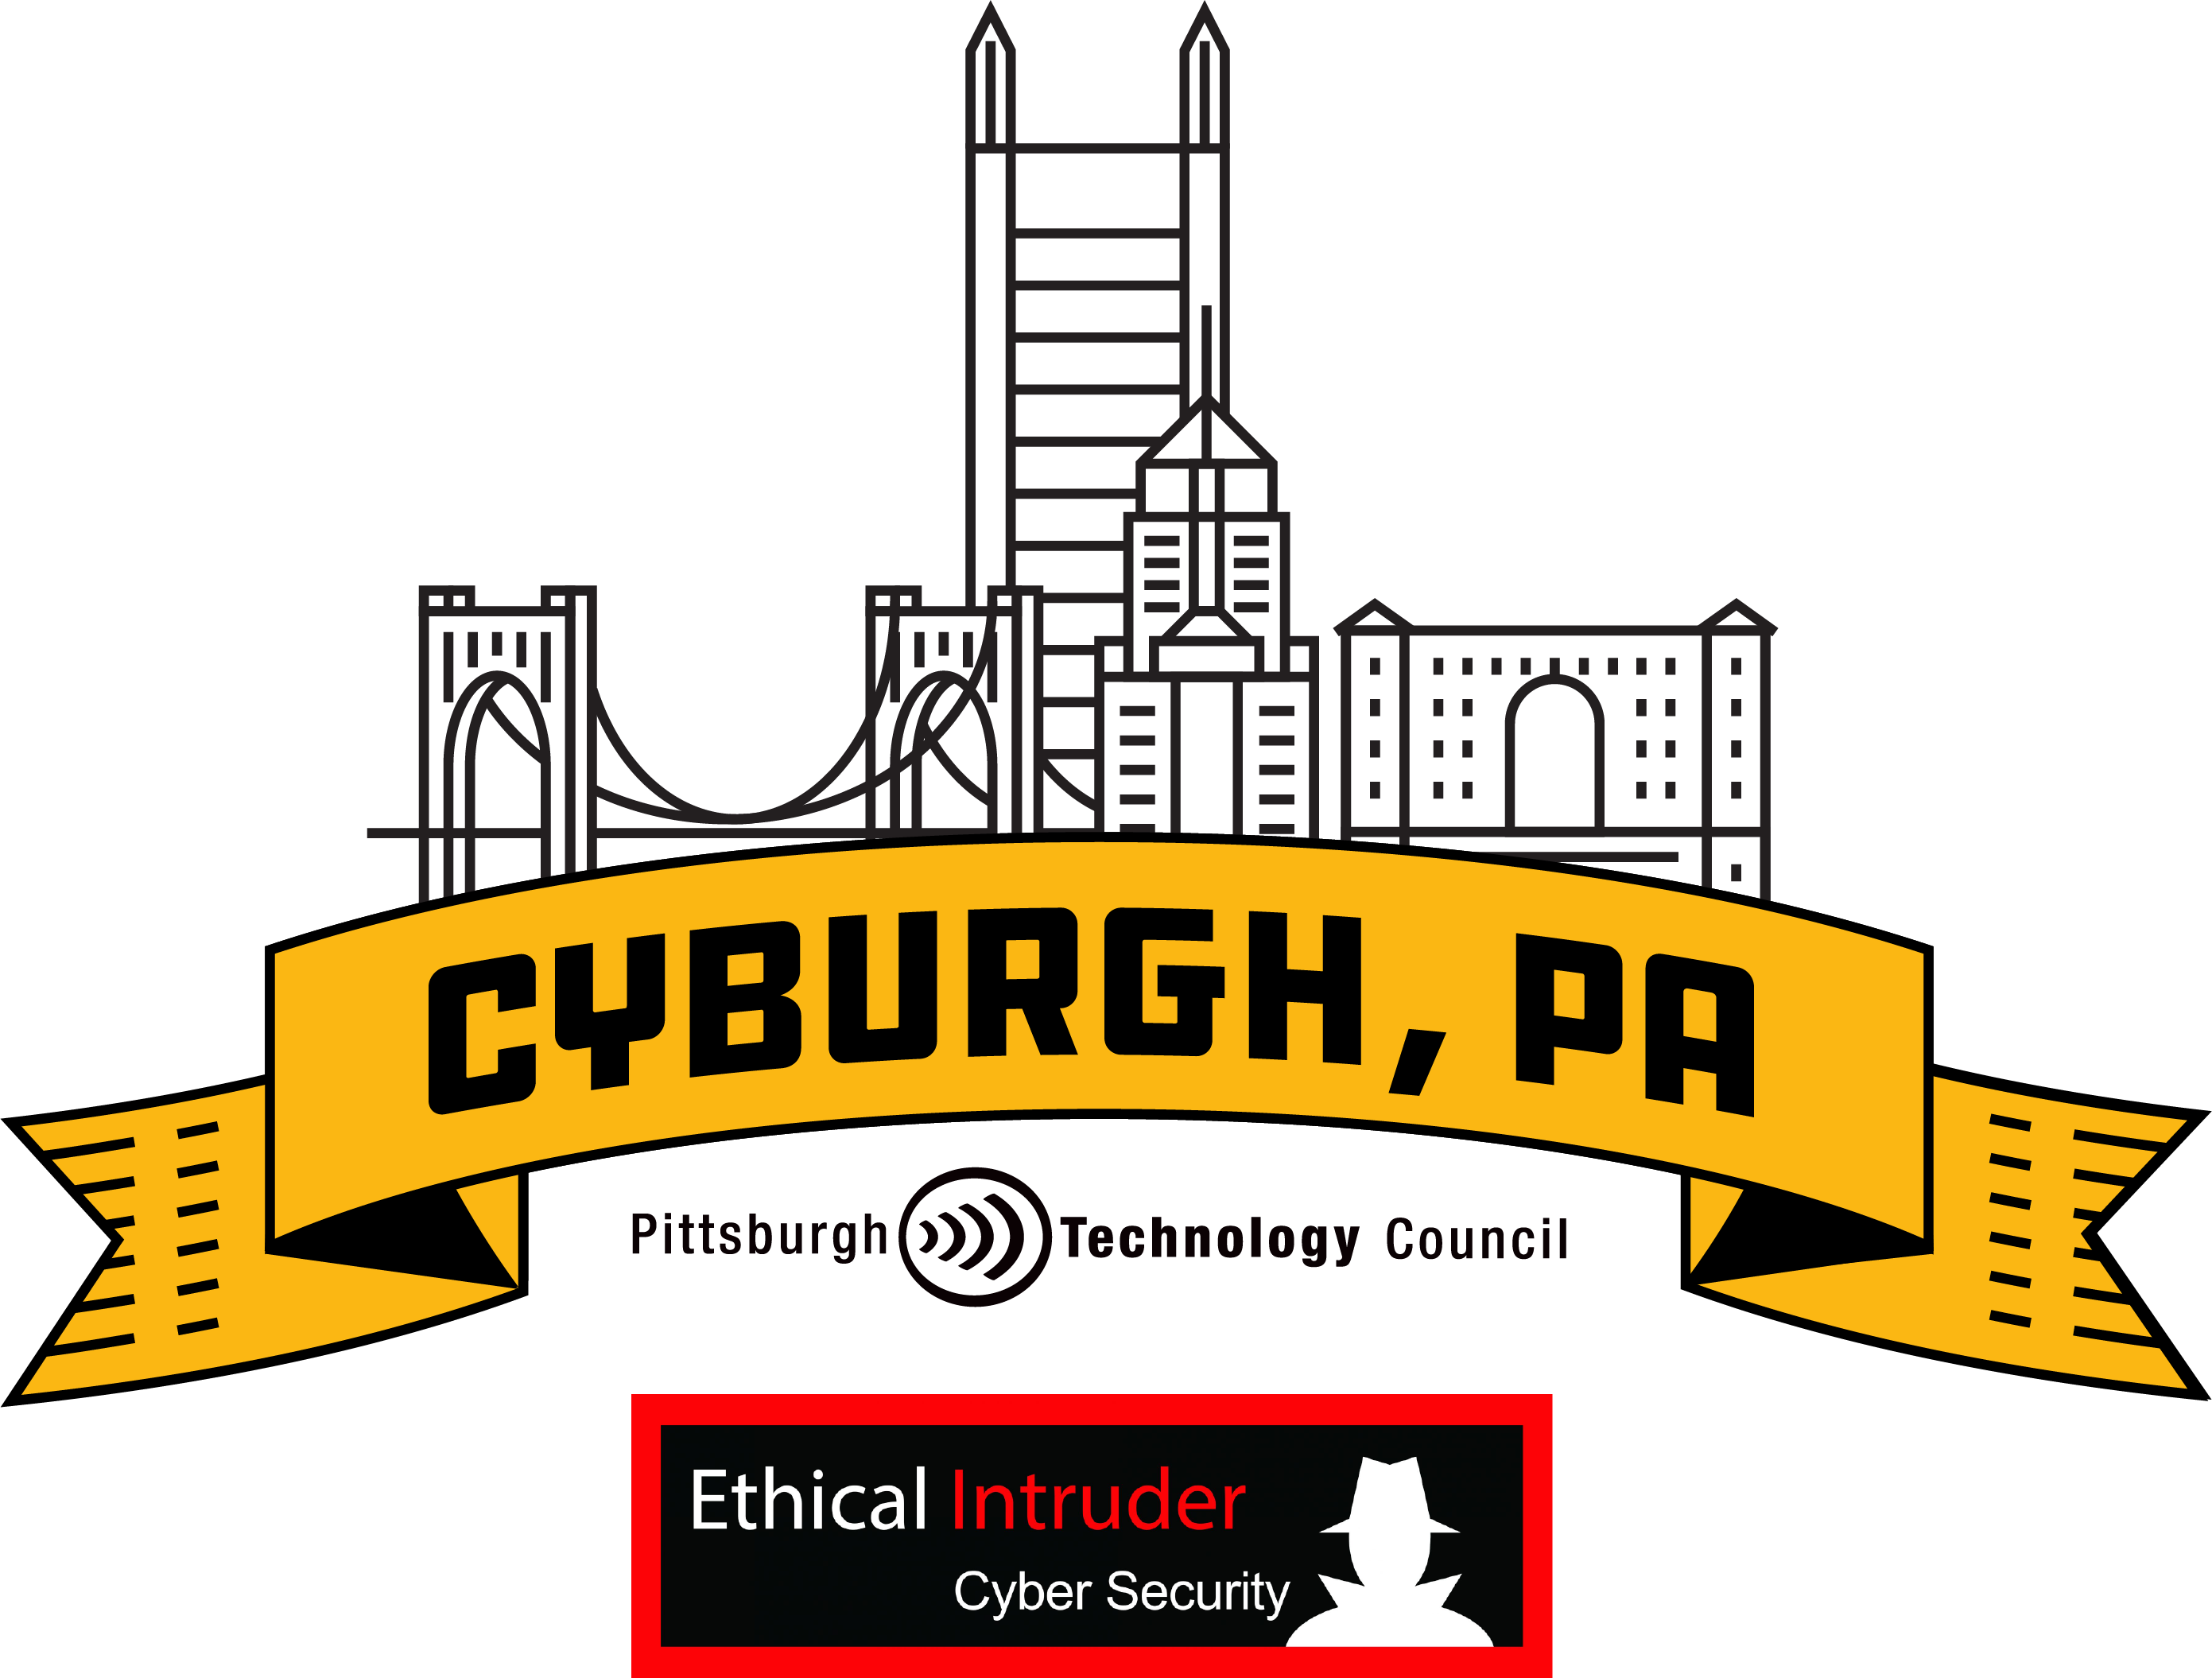 Cyburgh Logo, Presented by Pittsburgh Technology Council and Ethical Intruder